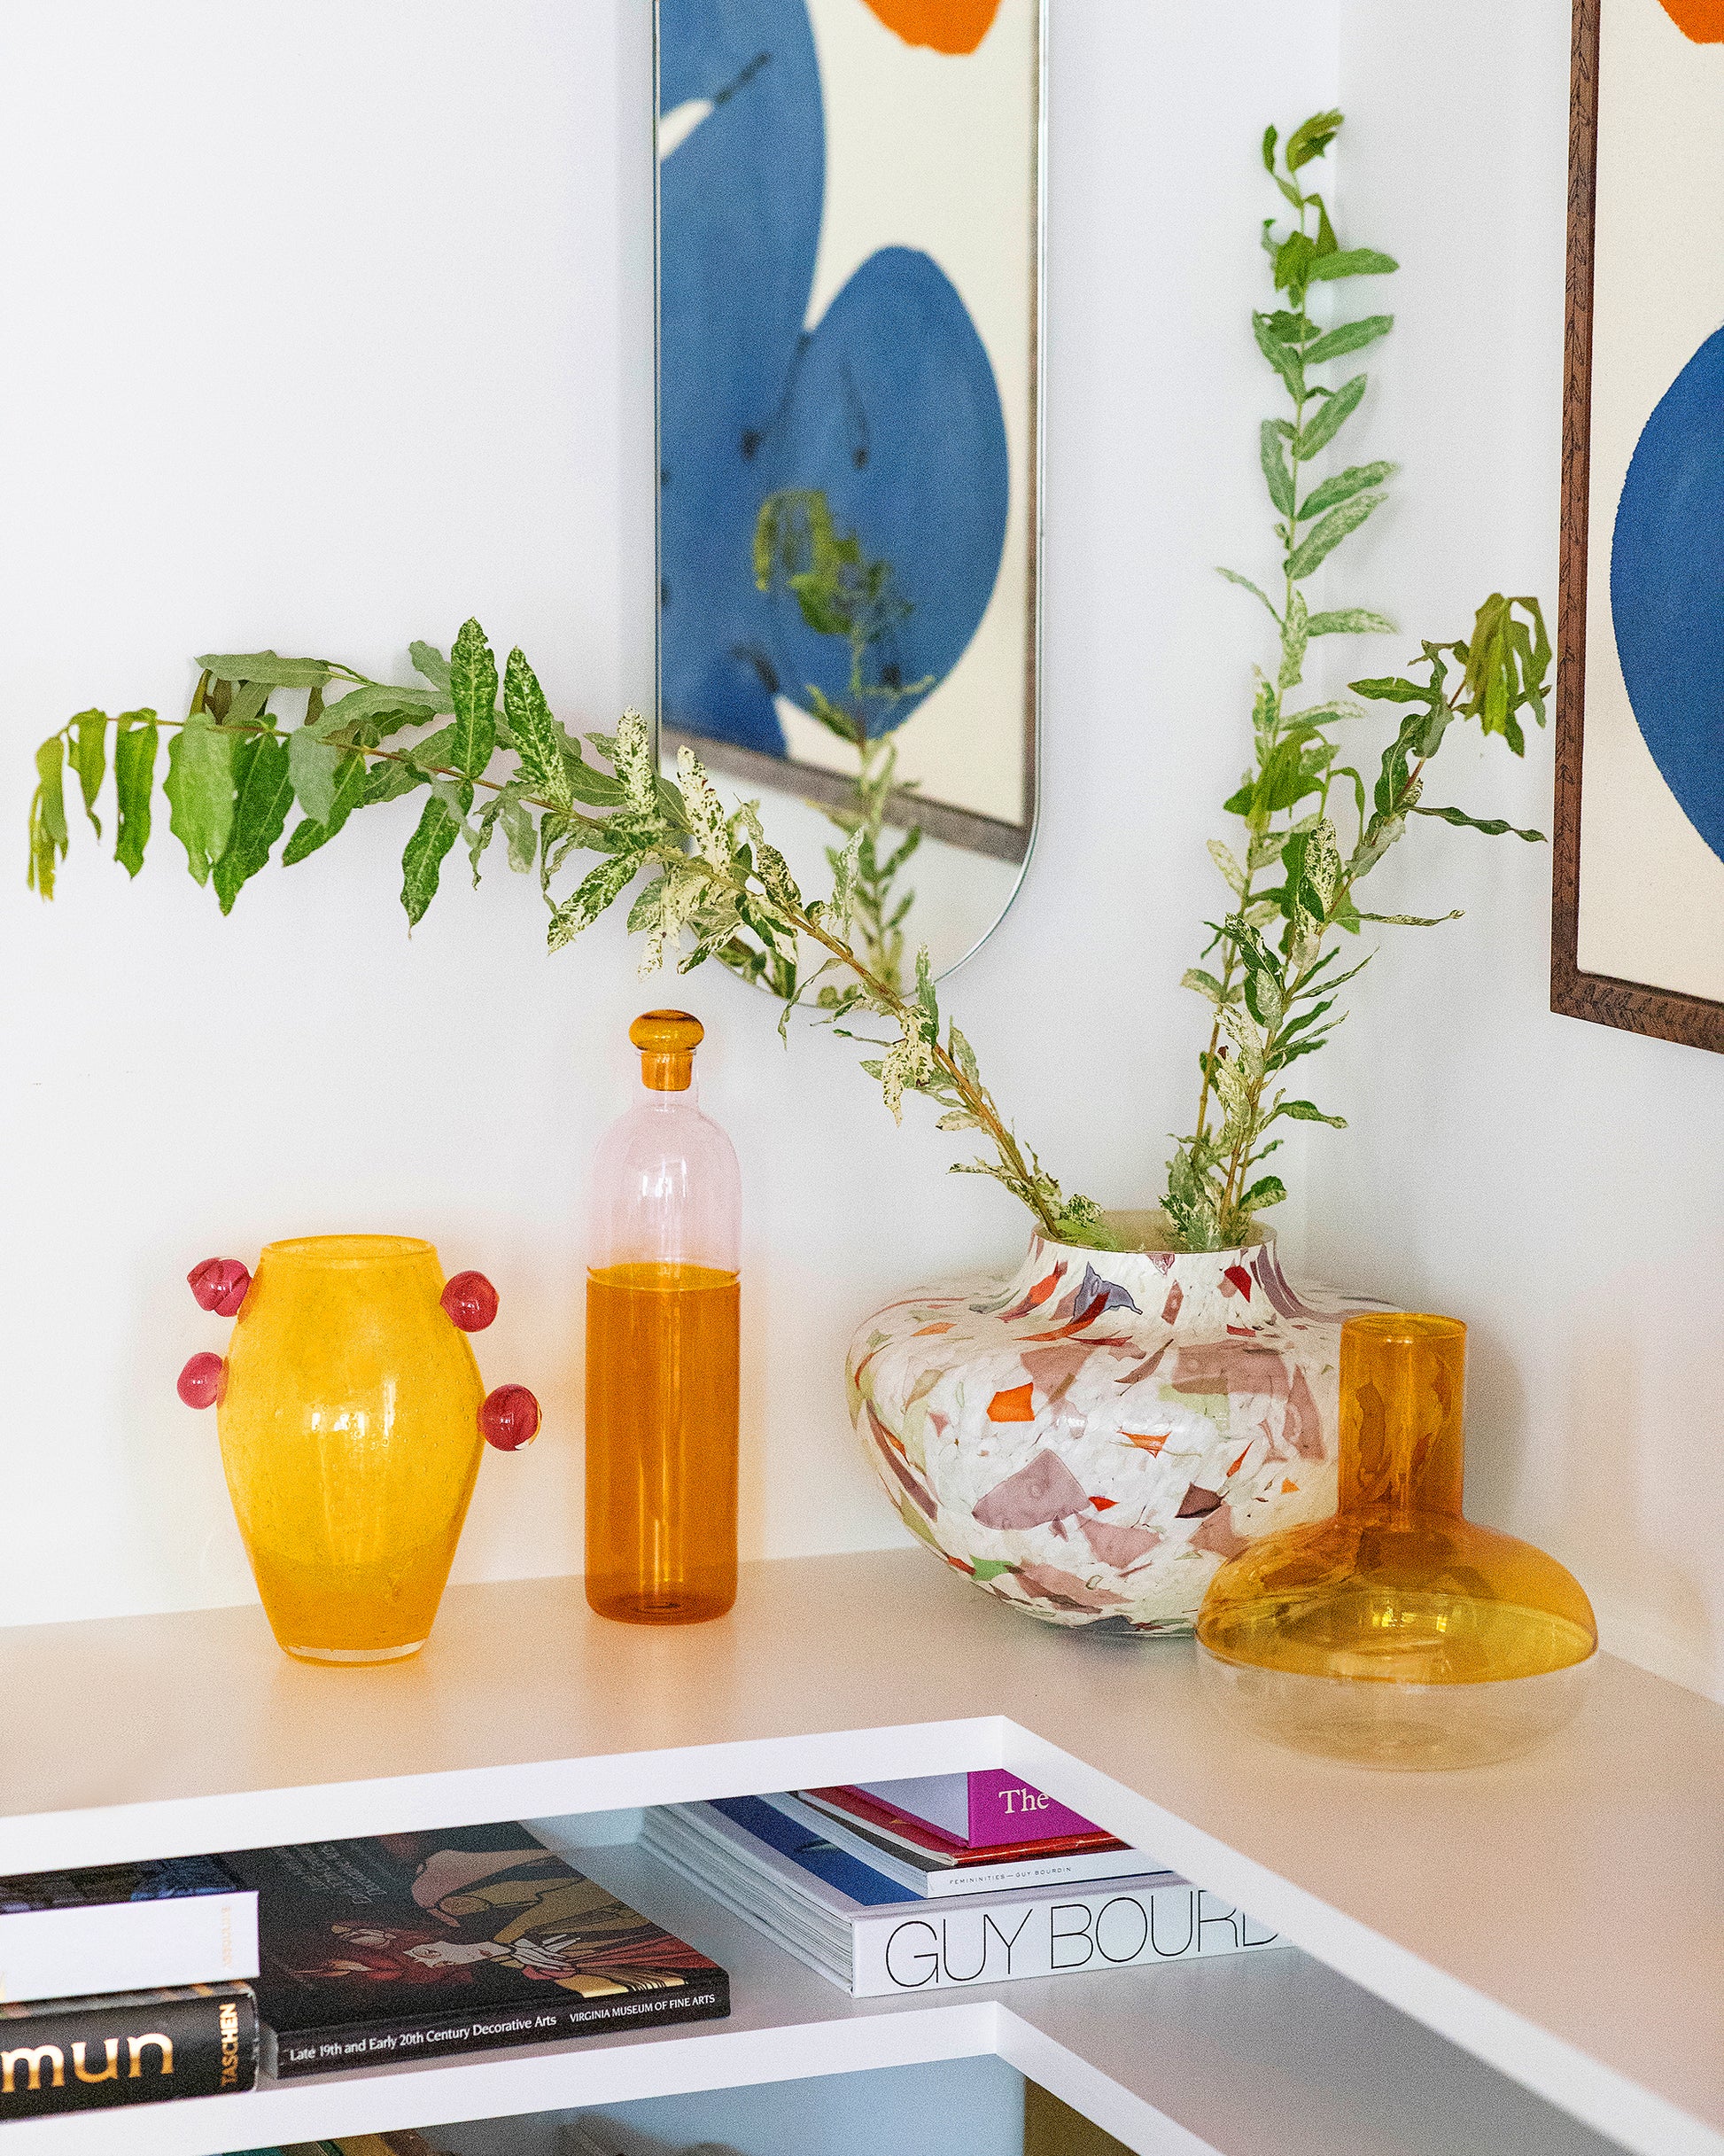 Styled image featuring the Stories of Italy Spring Nougat Glass Vase, La Romaine Editions x Sophie Lou Jacobsen Grand Le Corail Flamboyant Vase and Ichendorf Milano Pink/Amber Light Colore Bottle and Alchemy Decanter.